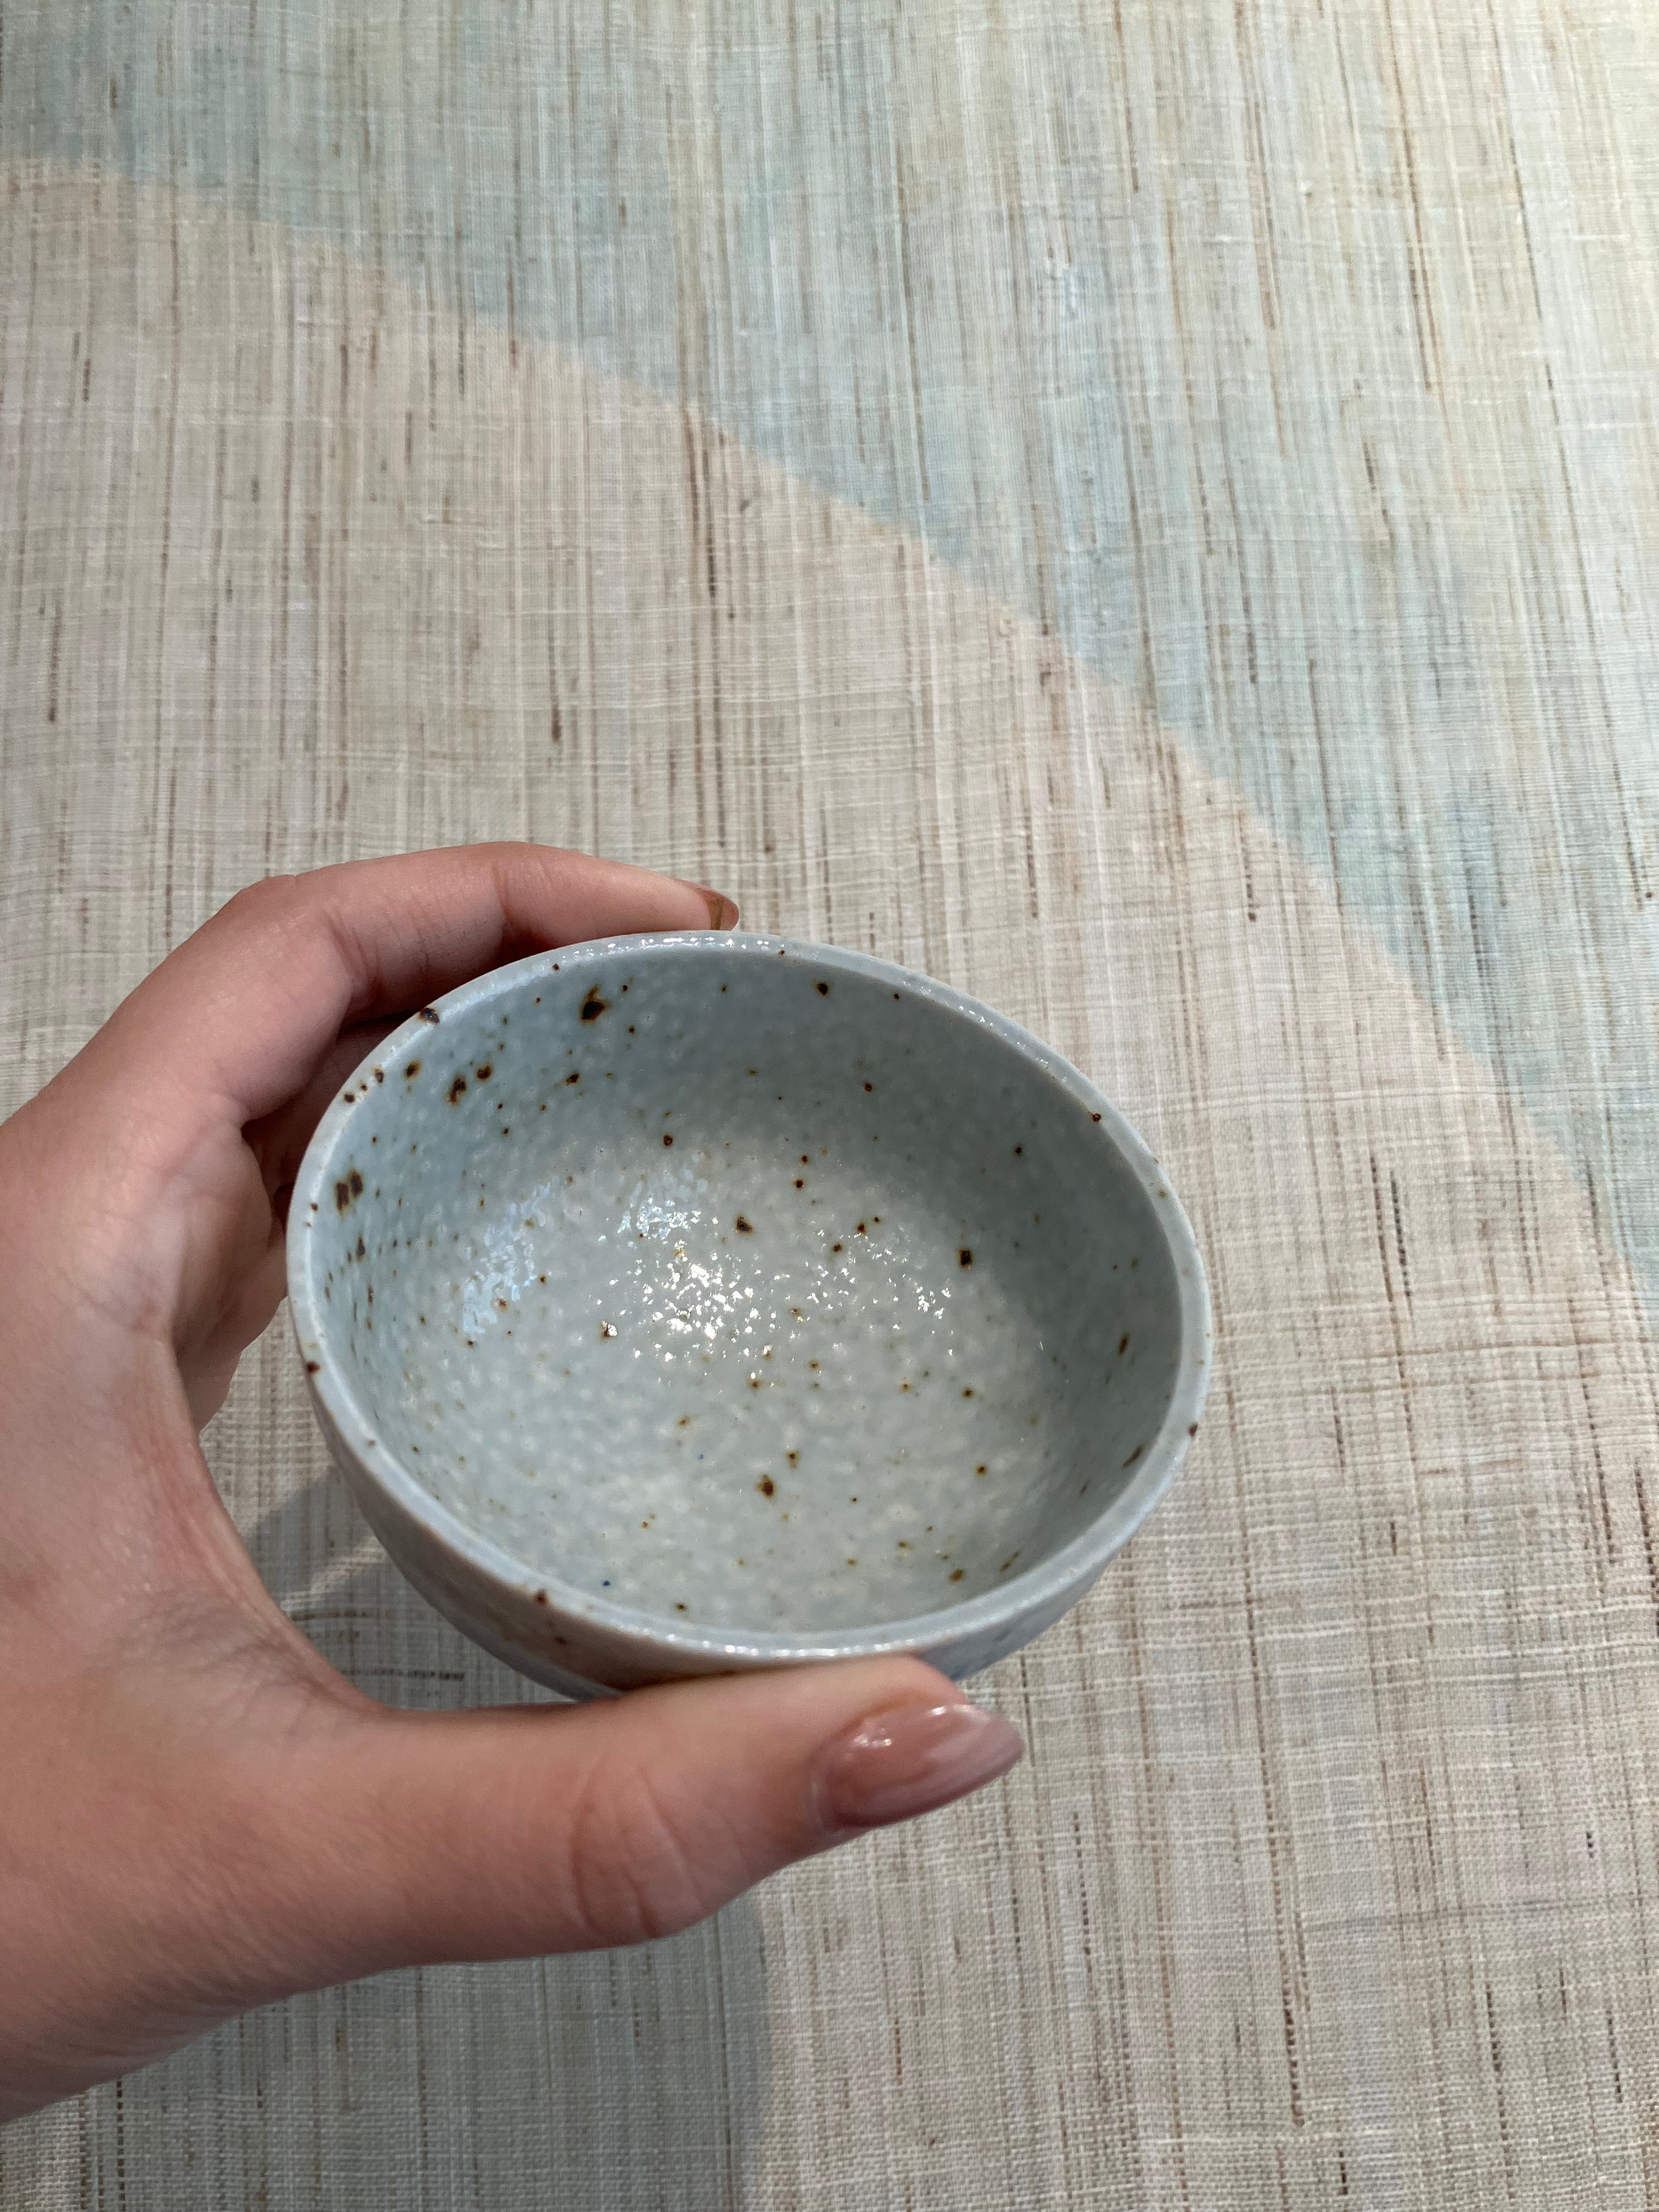 Small bowl with blue-grey glaze and brown dots